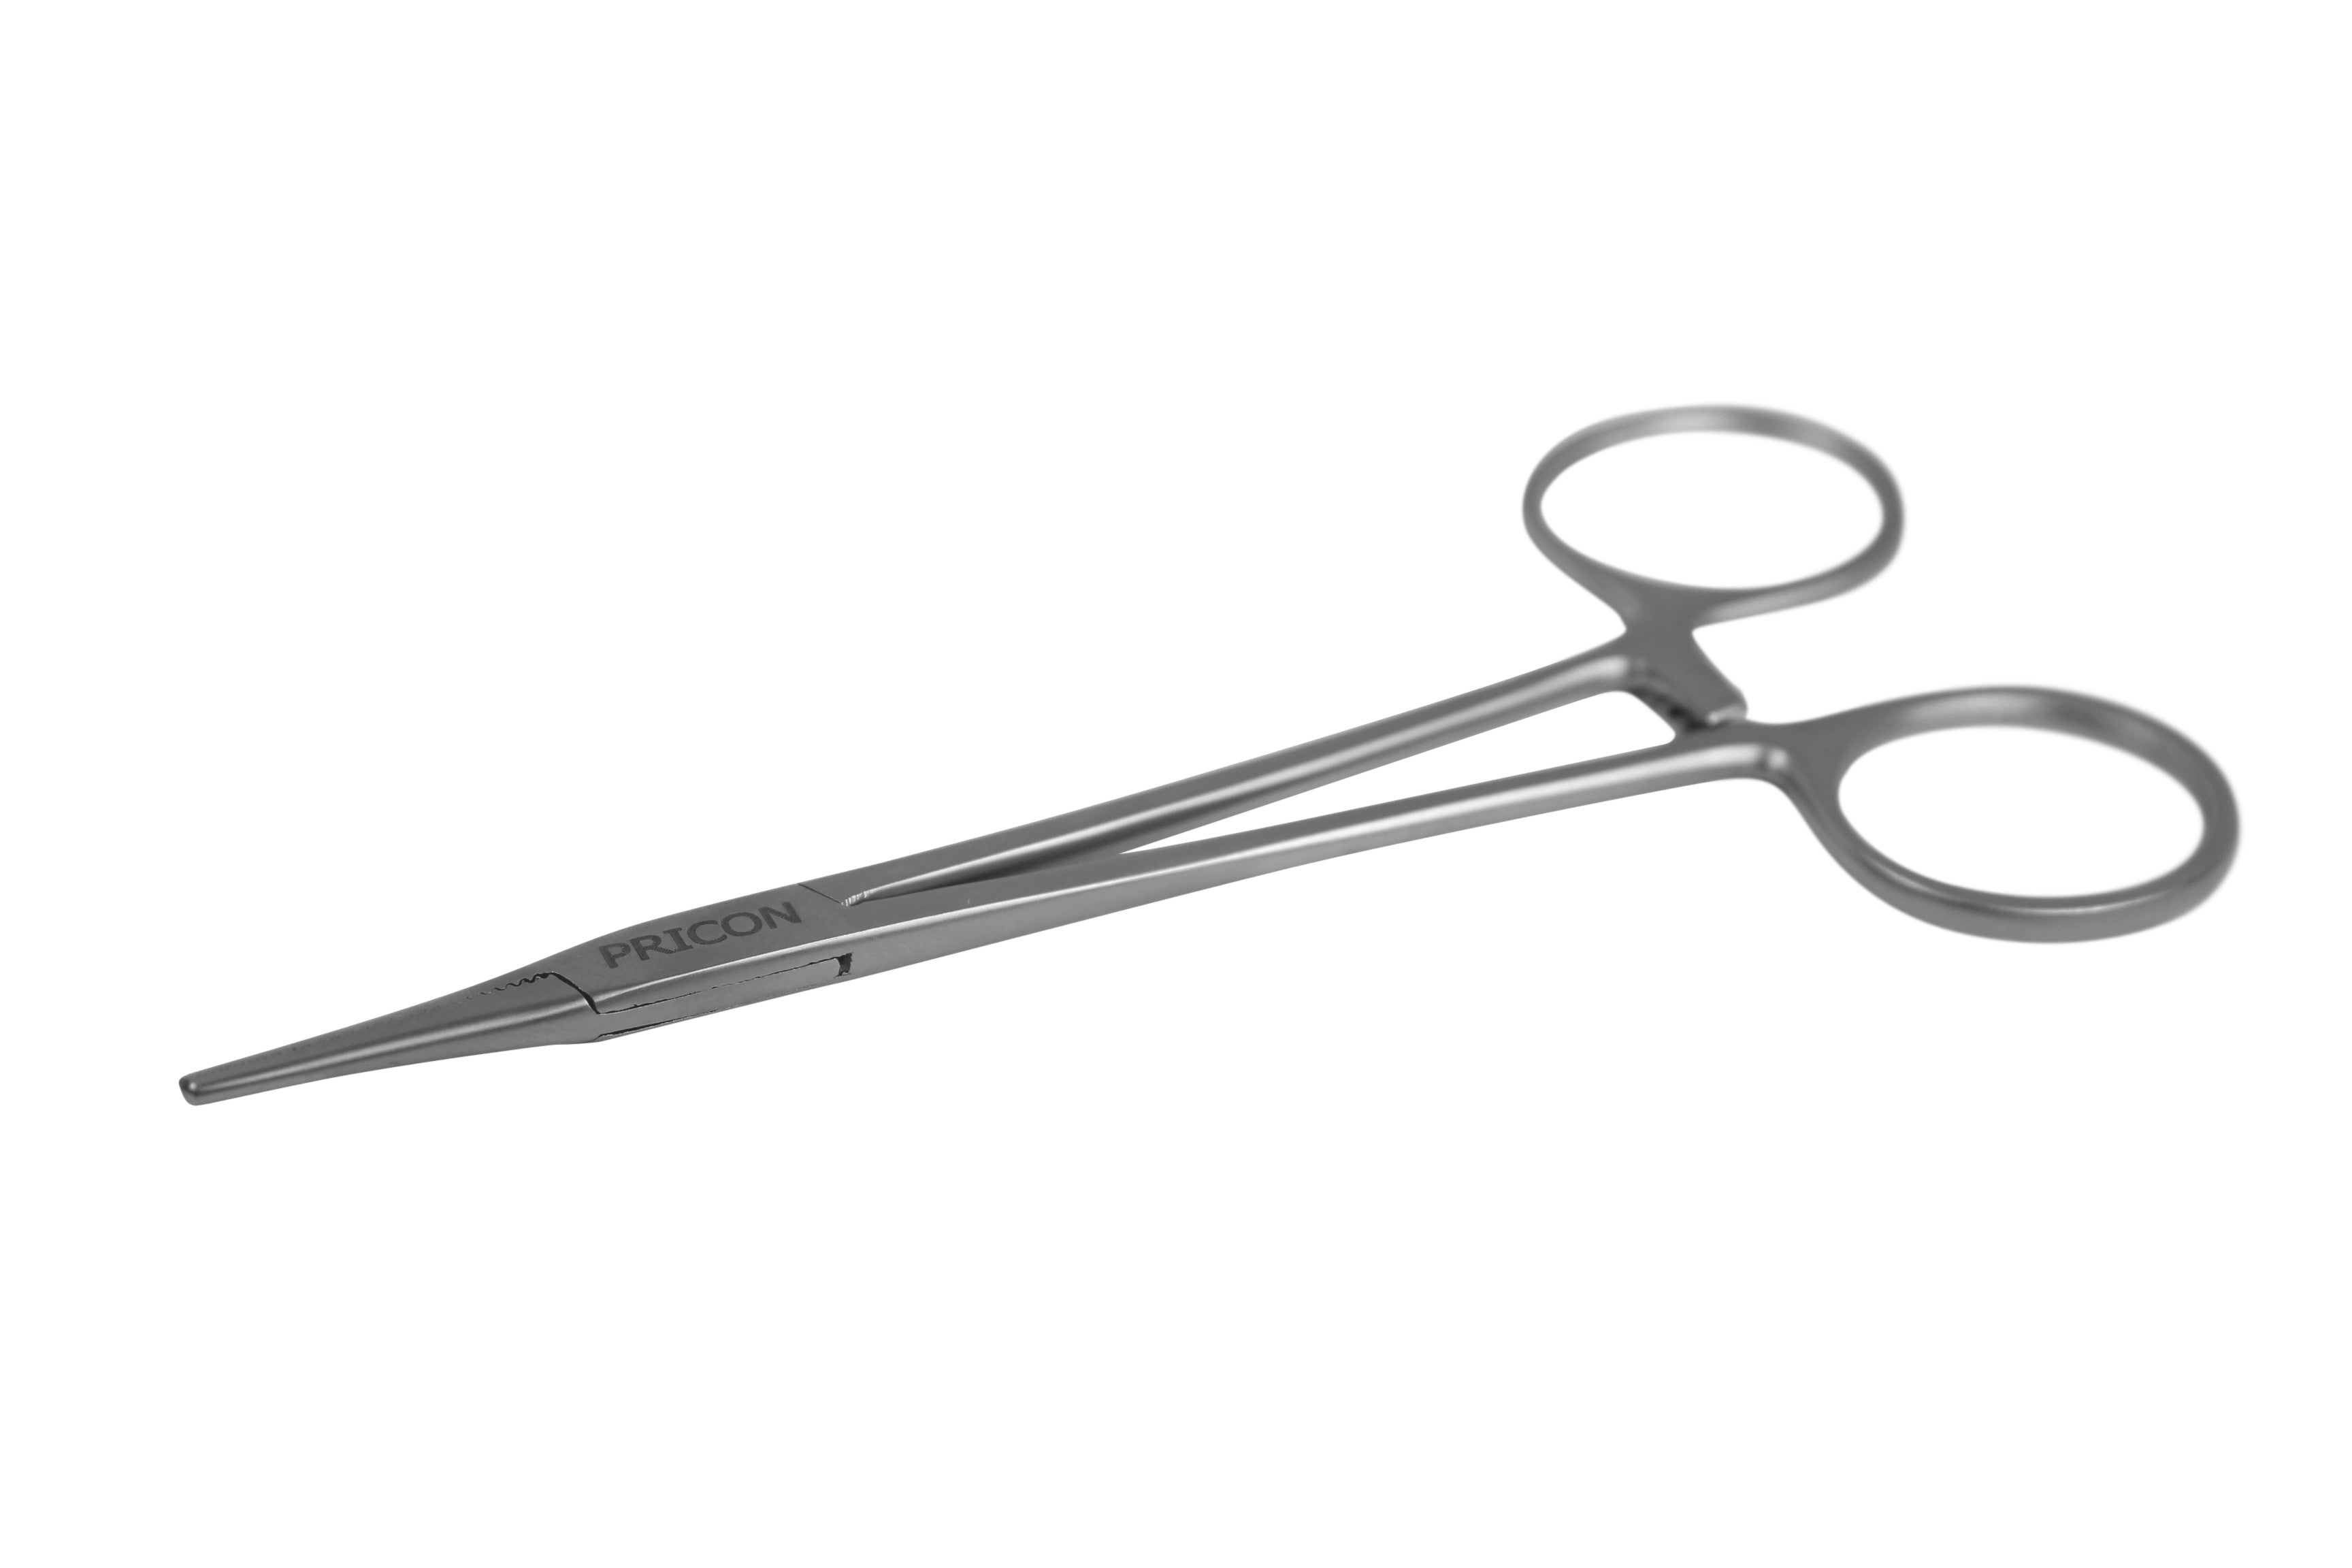 Halstead Mosquito Forceps  Disposable and Reusable Animal Feeding